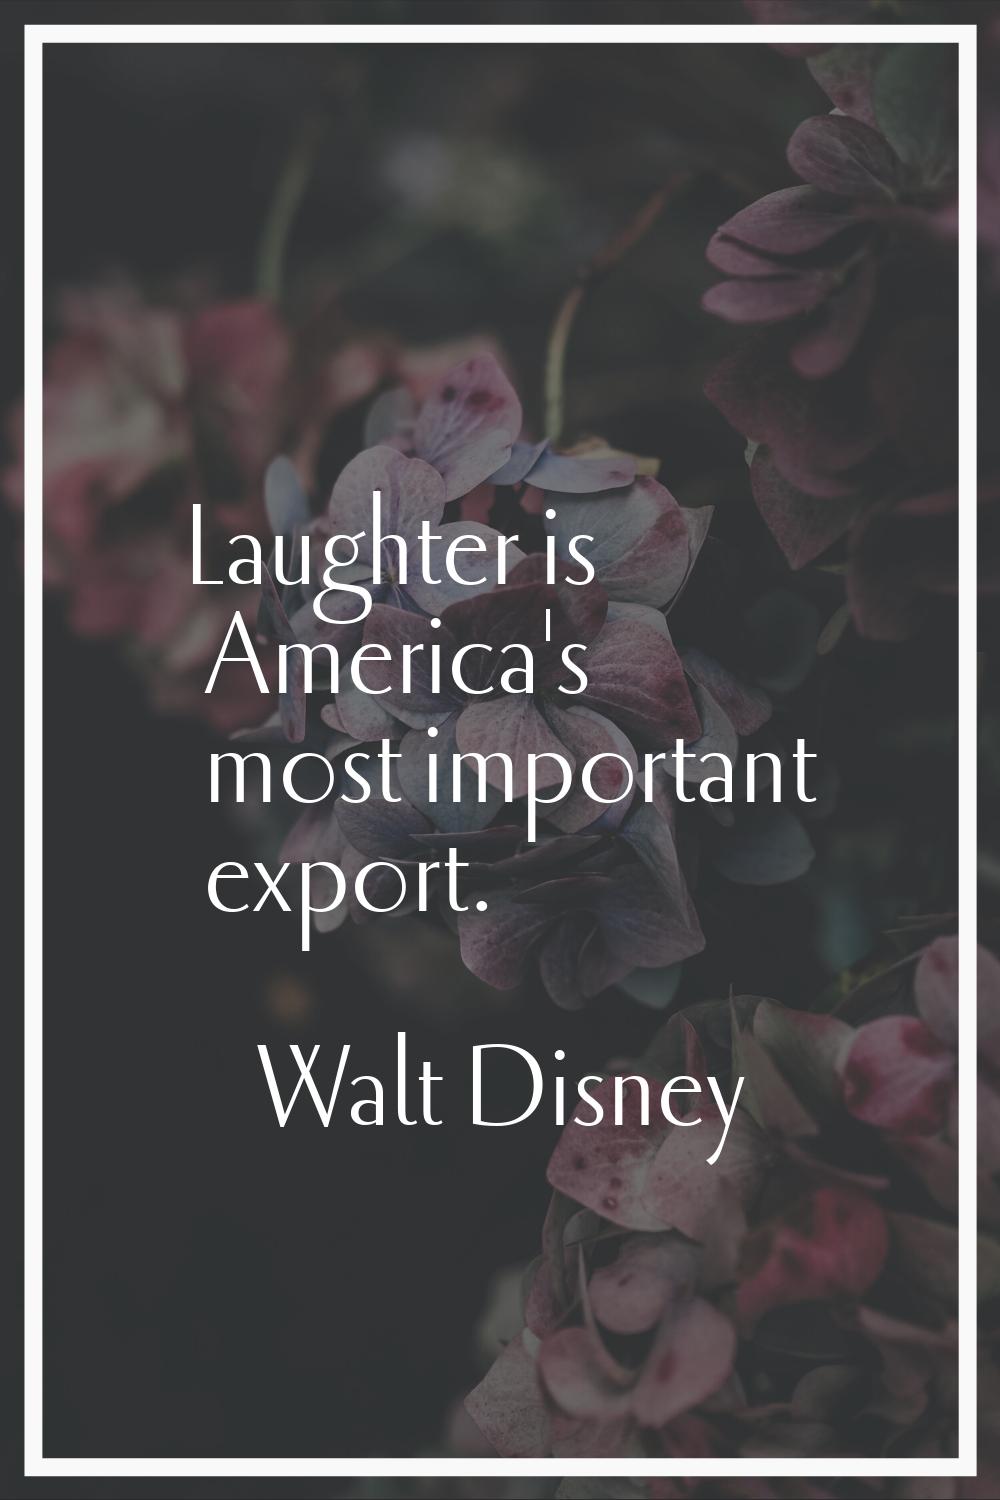 Laughter is America's most important export.